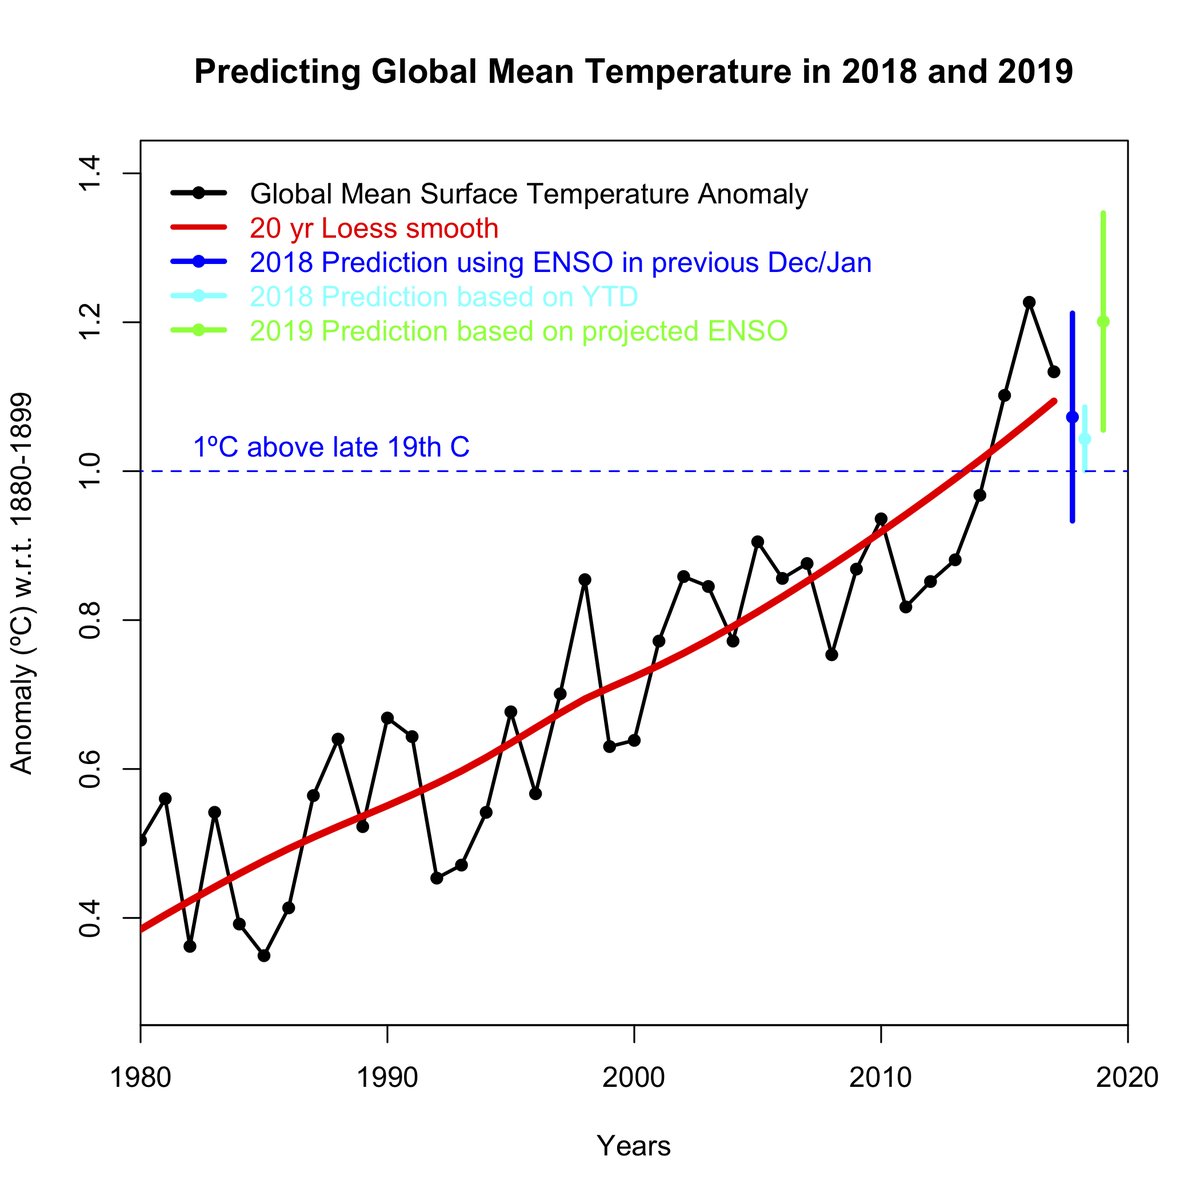 Graph showing Temperature projections for 2018 and 2019 provided by Dr Gavin Schmidt in late November 2018, using data from NASA GISTemp.